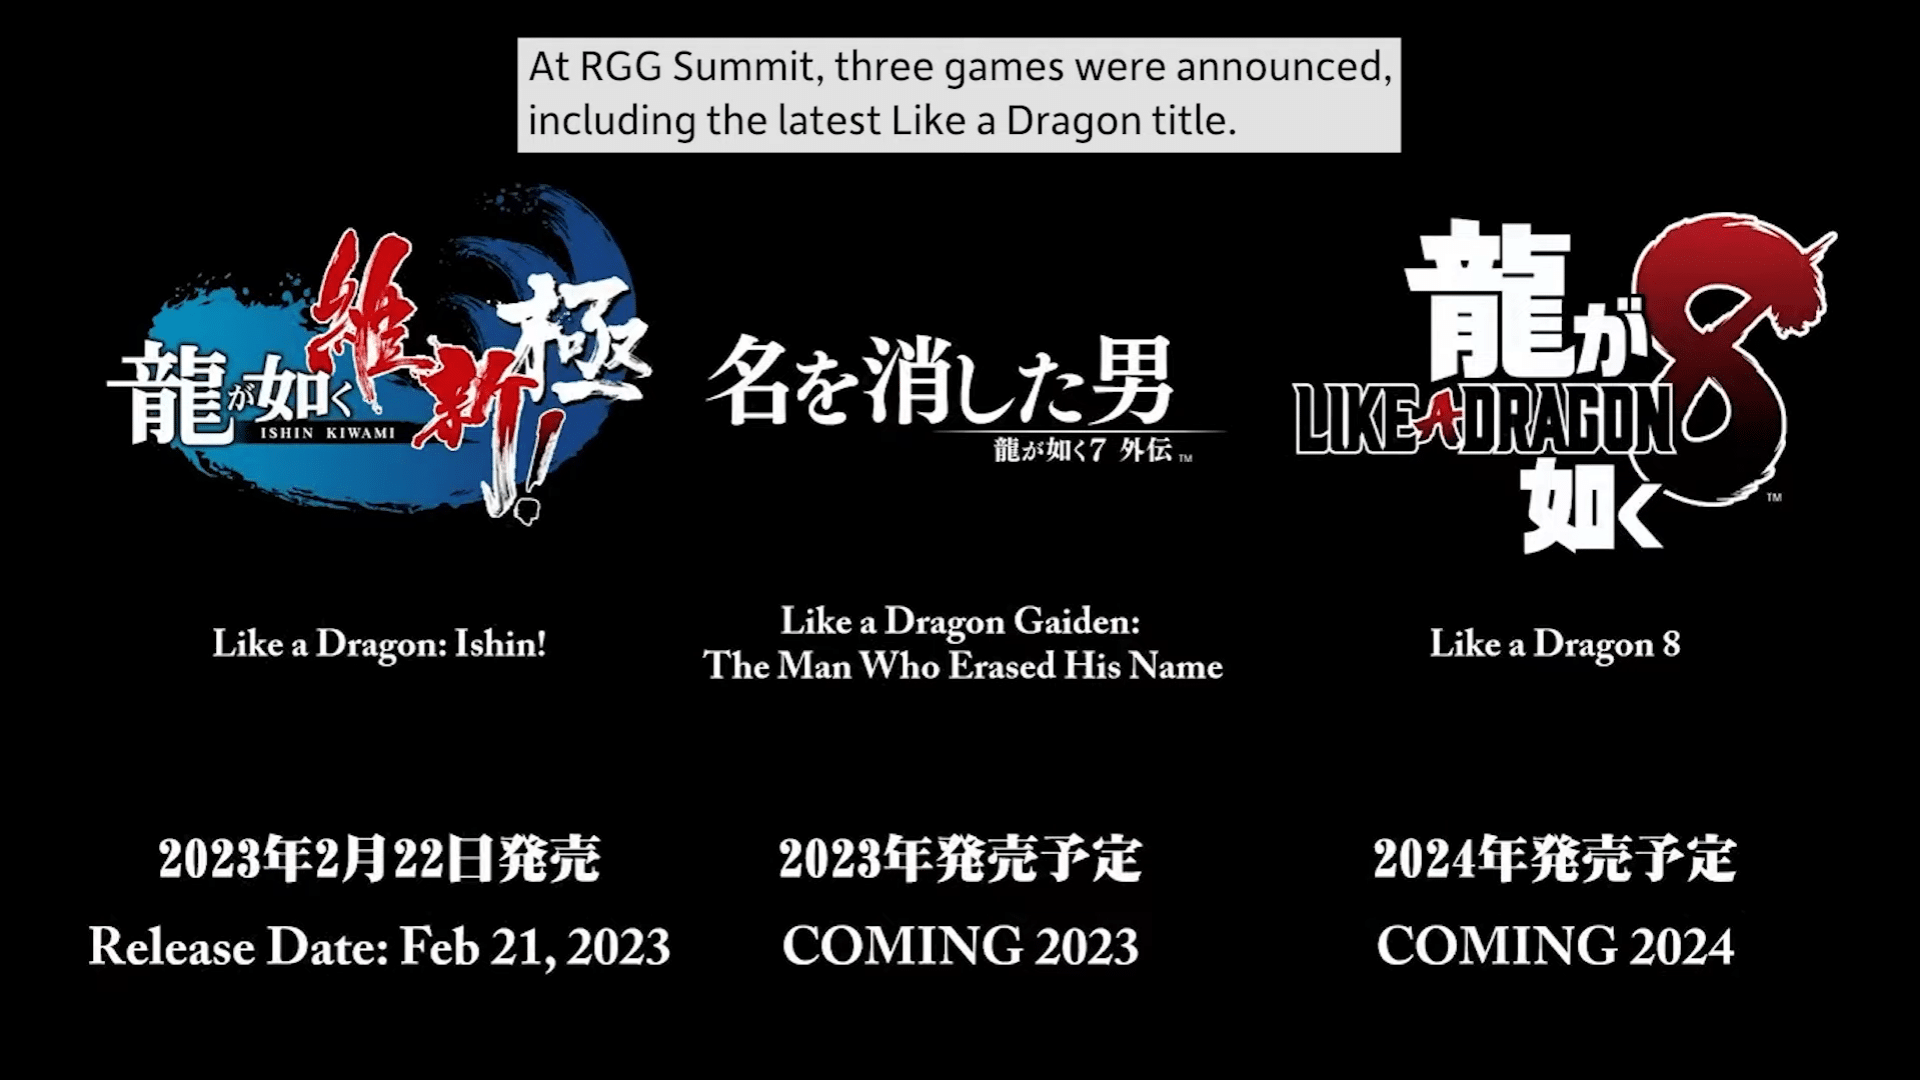 Like a Dragon! Behind-the-Scenes Series Episode #3 Highlights Backstage RGG Summit 2022 Efforts & TGS 2022 Ishin! Demo Fan Reactions